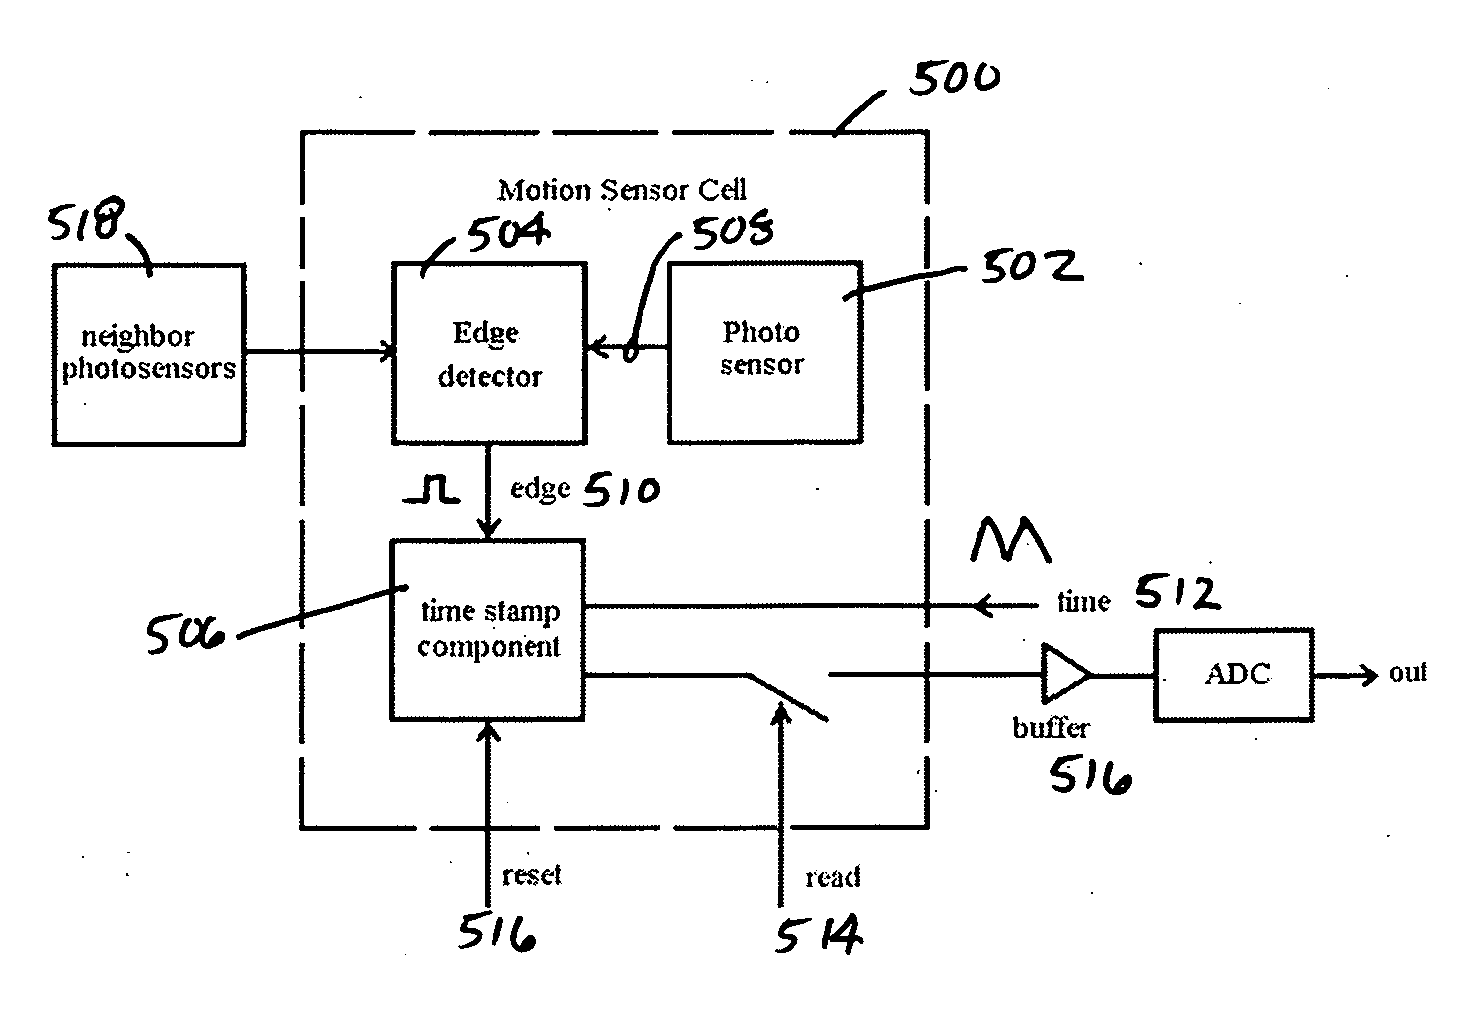 Method, system and apparatus for a time stamped visual motion sensor